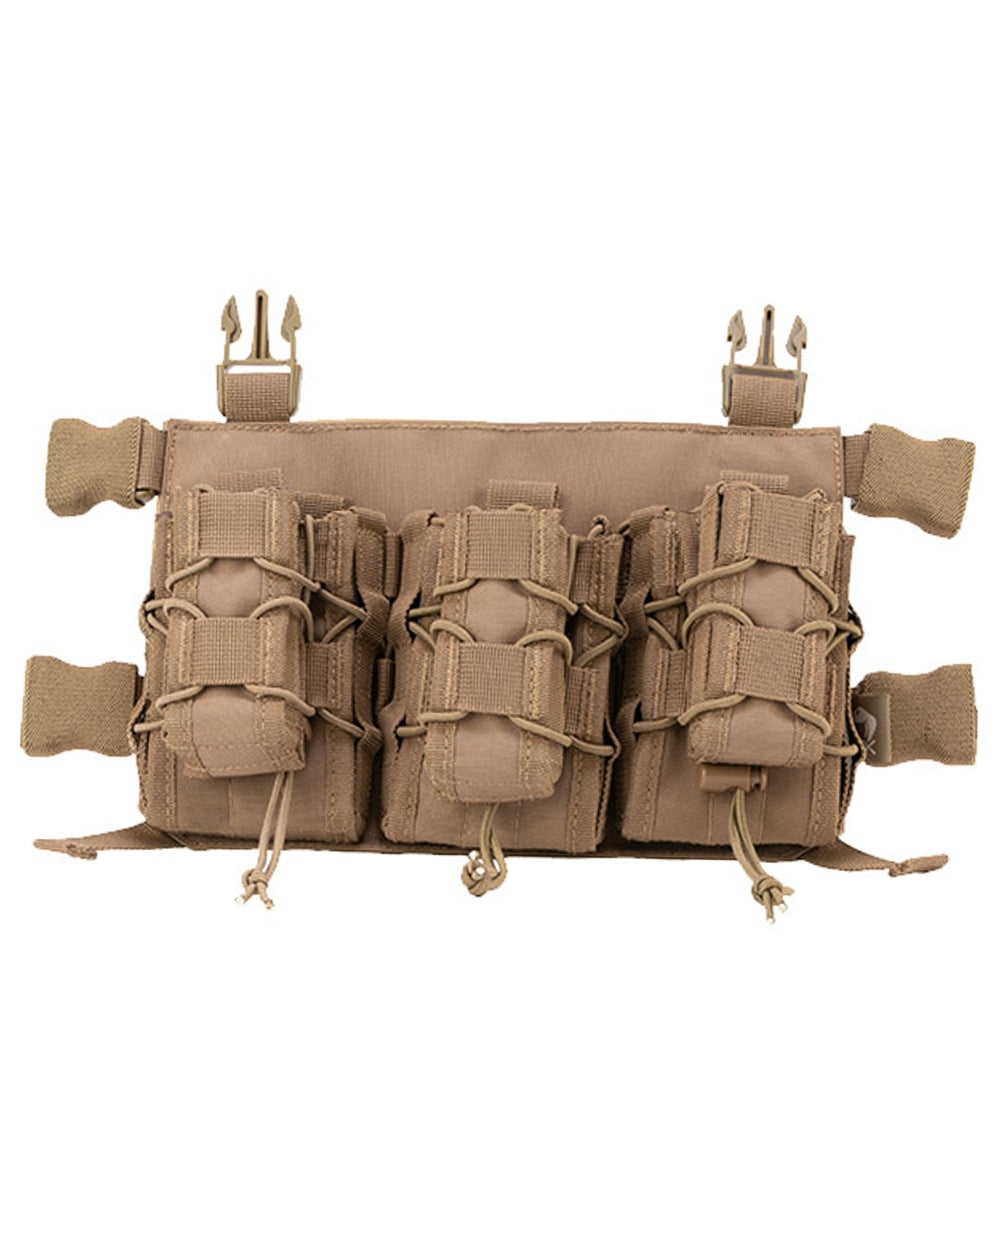 Viper VX Buckle Up Mag Rig in Dark Coyote 